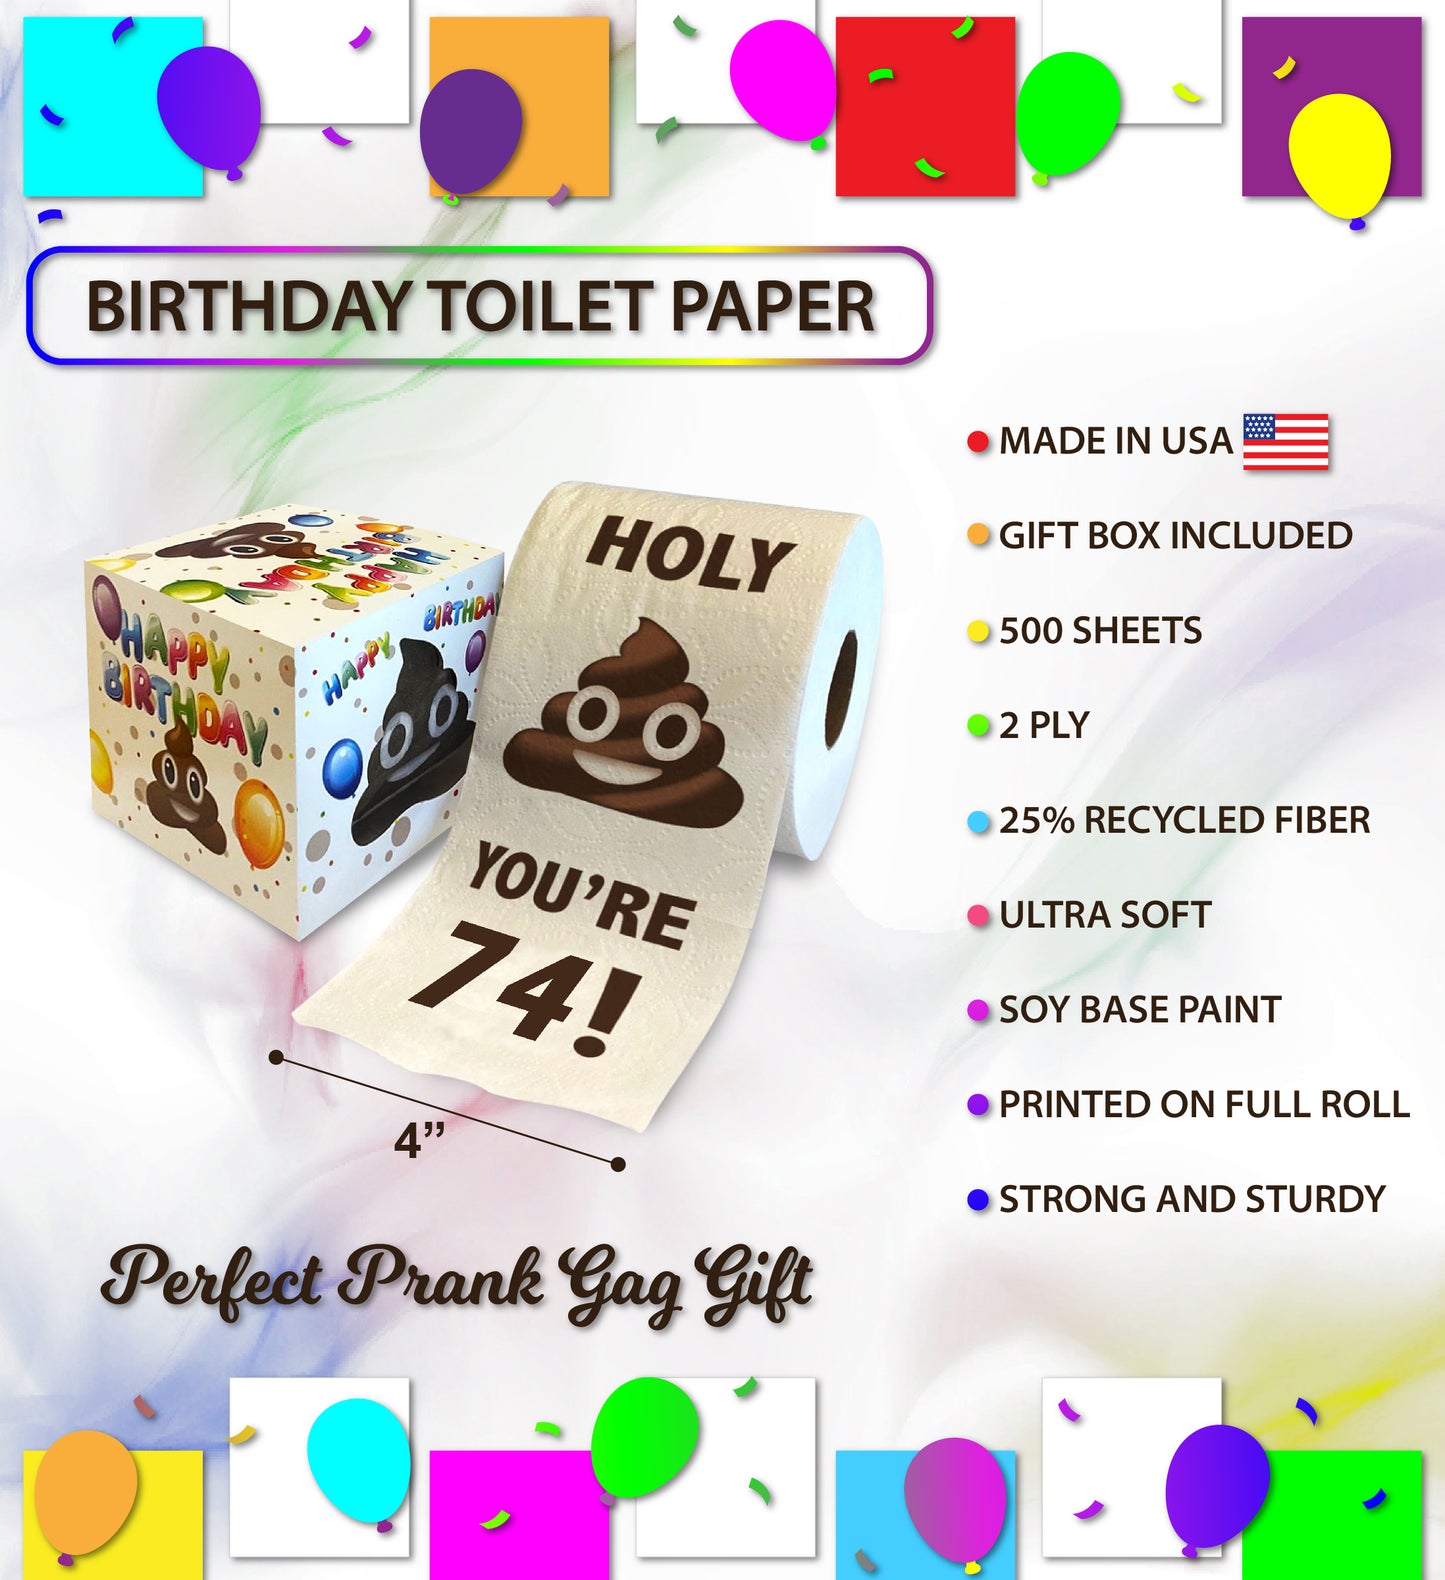 Printed TP Holy Poop You're 74 Funny Toilet Paper Roll Birthday Party Gag Gift